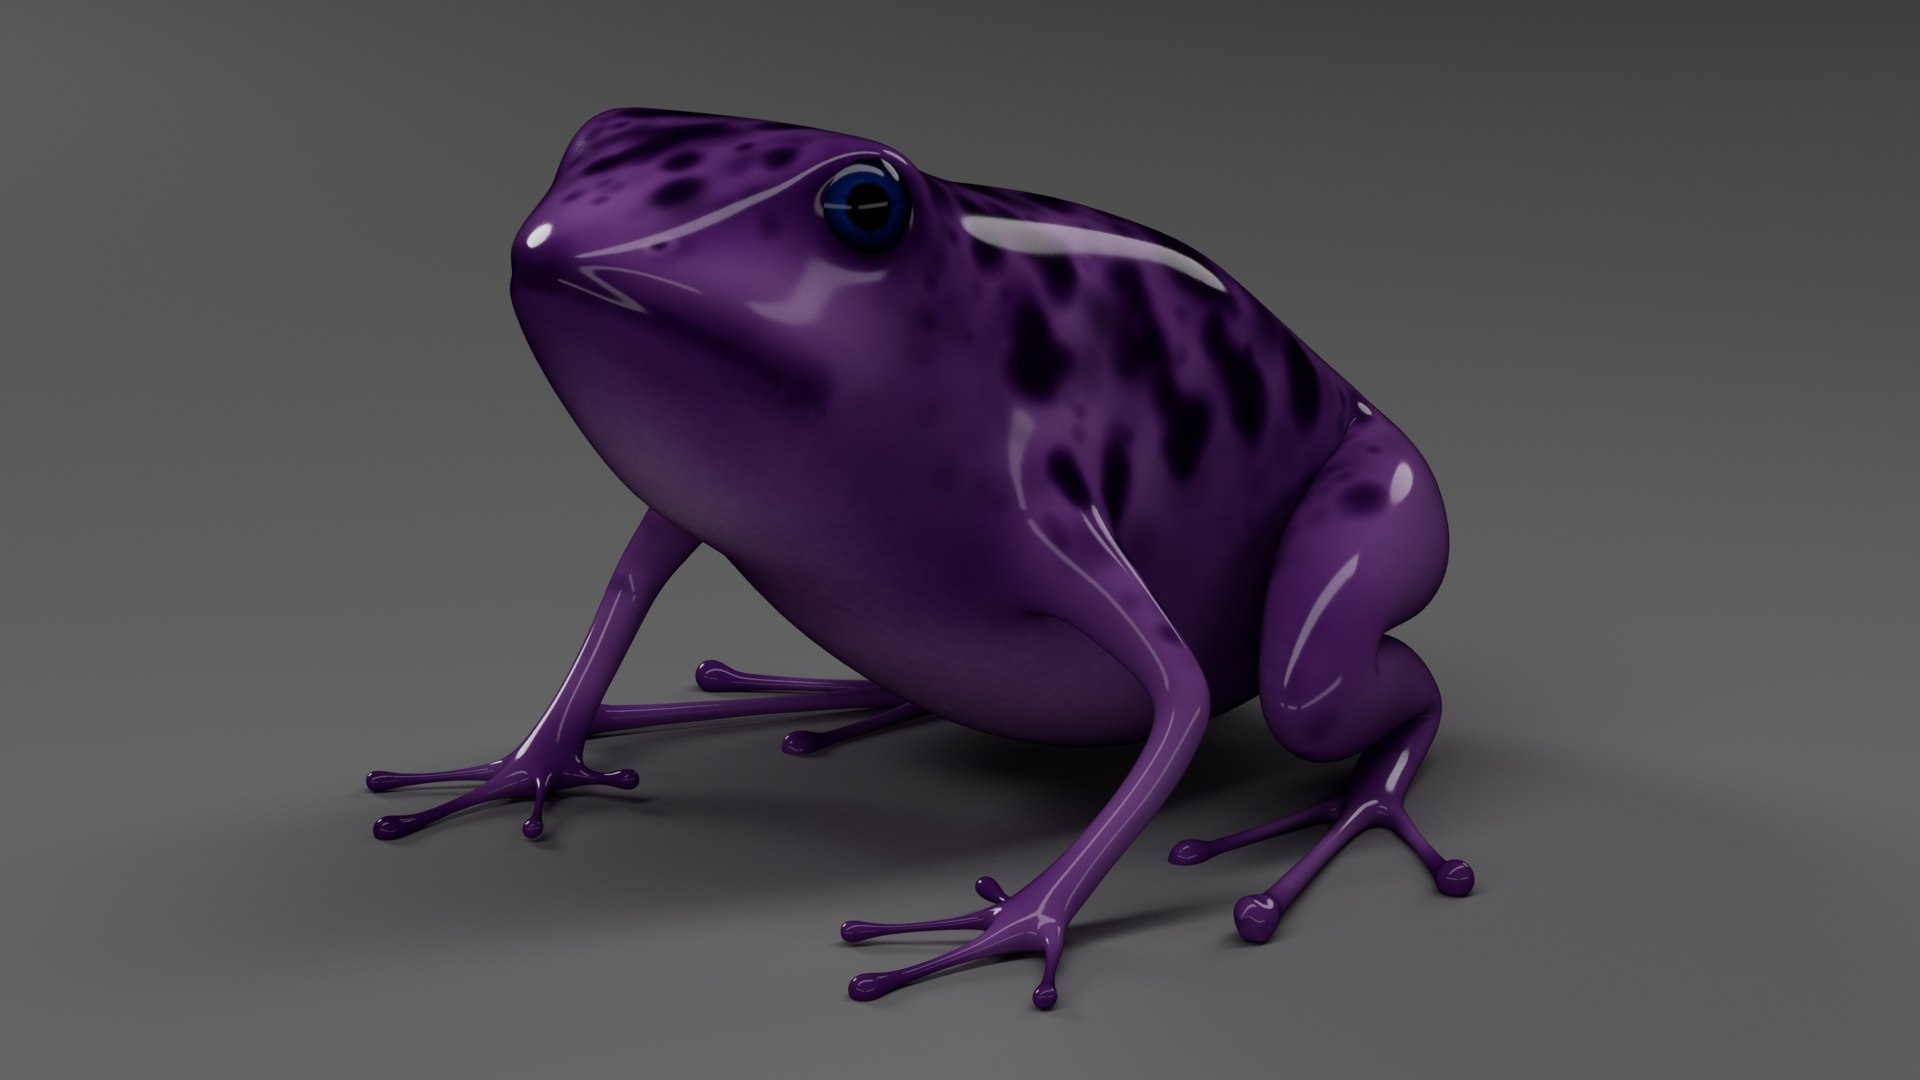 frog with purple on it